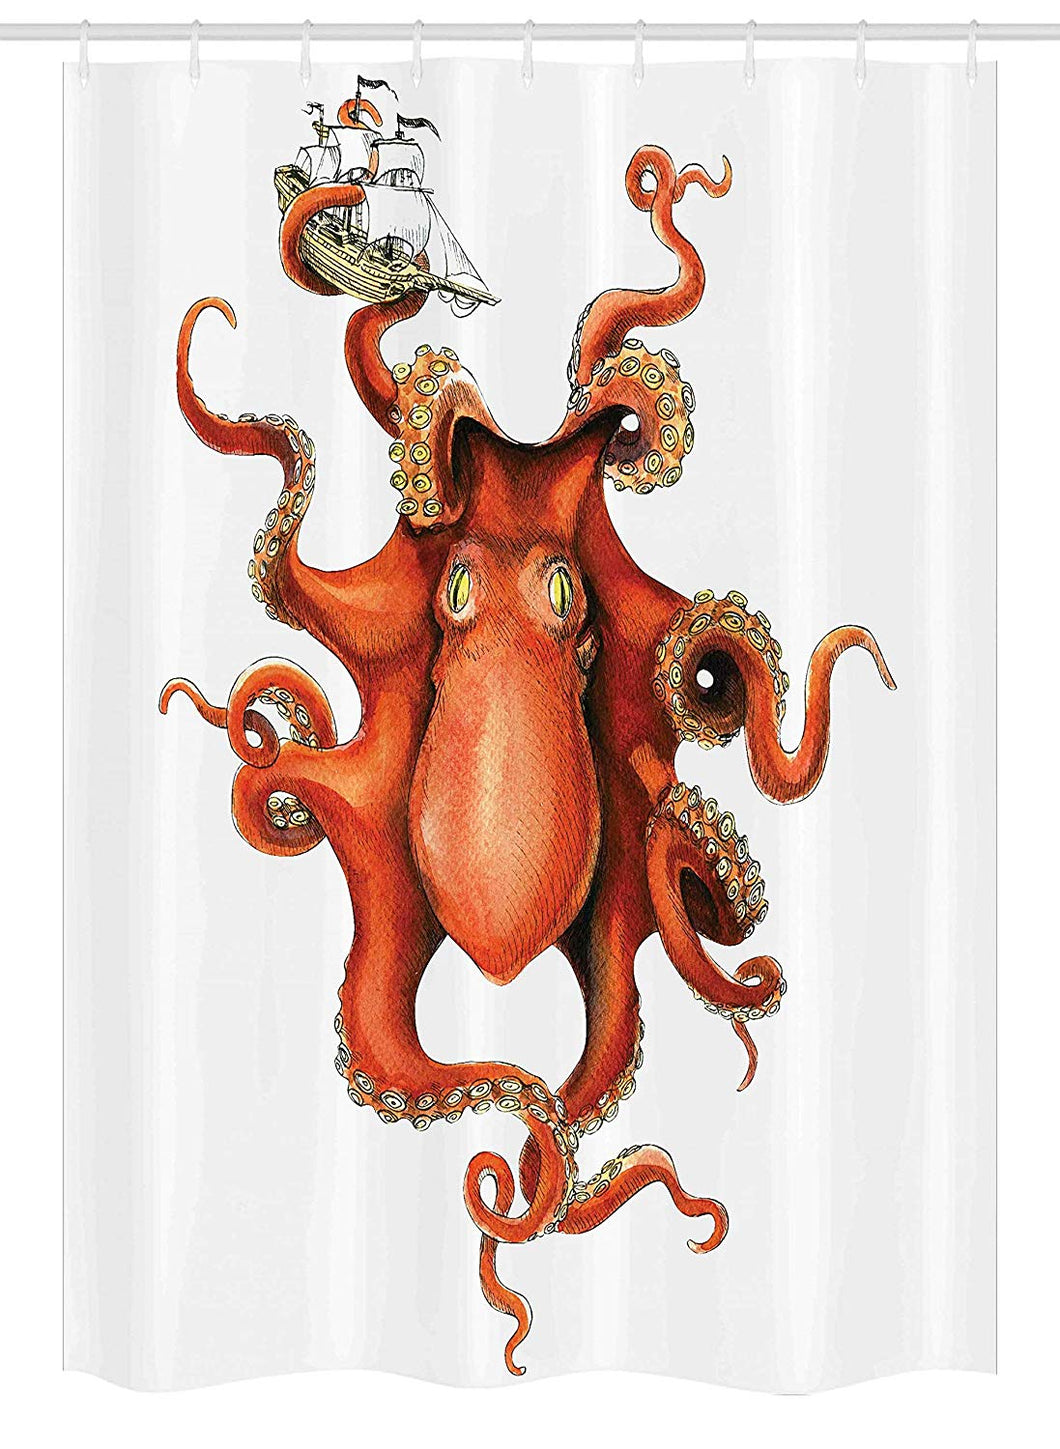 Ambesonne Octopus Stall Shower Curtain, Kraken Octopus Holding Sailing Ship in Tentacles Mythical Monster Nautical Theme, Fabric Bathroom Decor Set with Hooks, 54